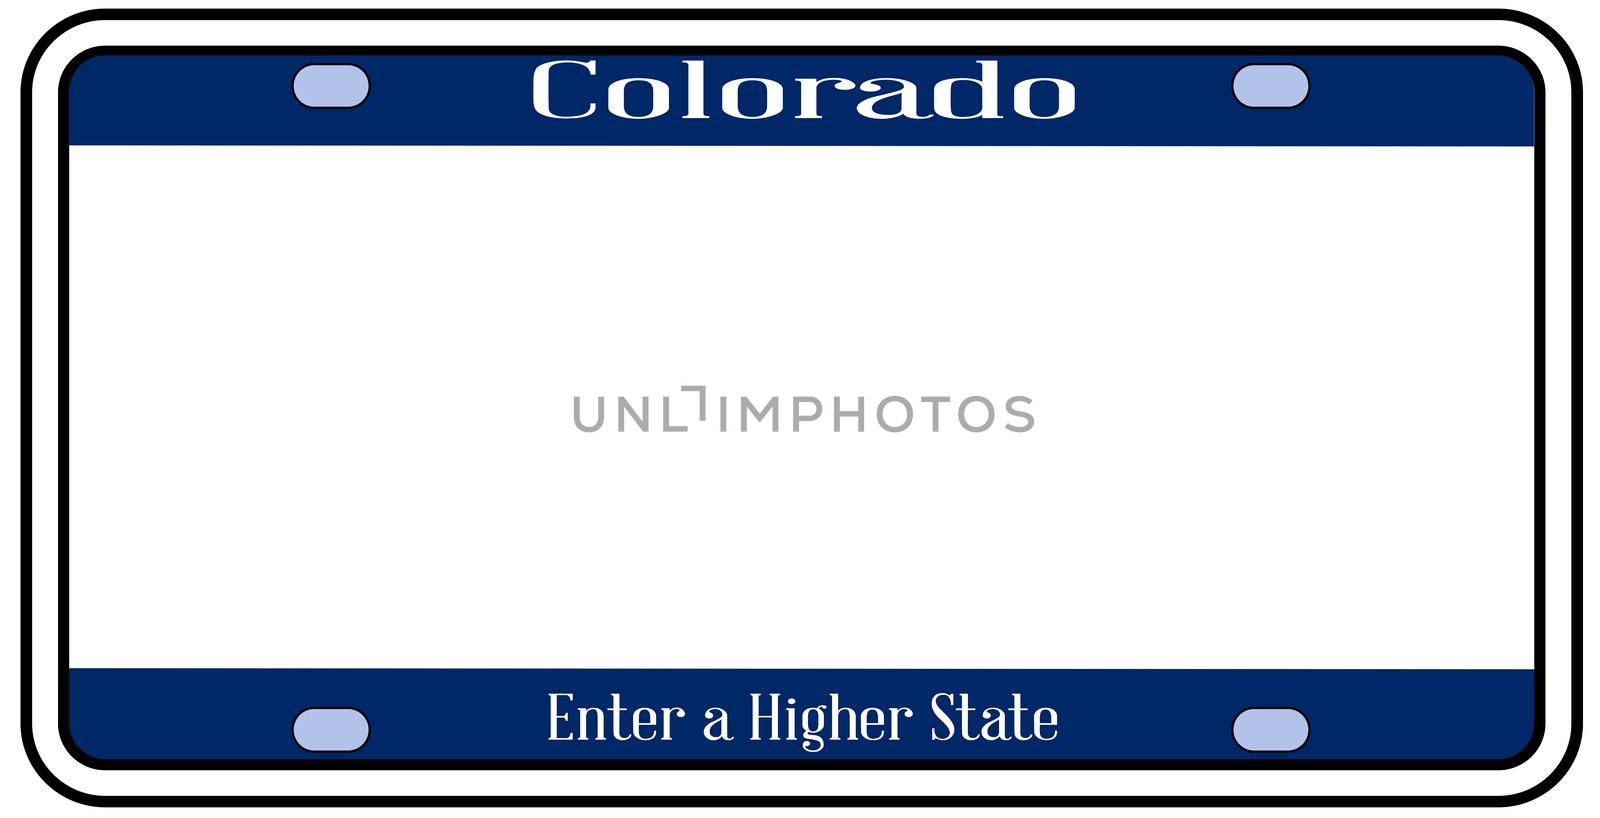 Colorado state license plate in the colors of the state flag with the flag icons over a white background